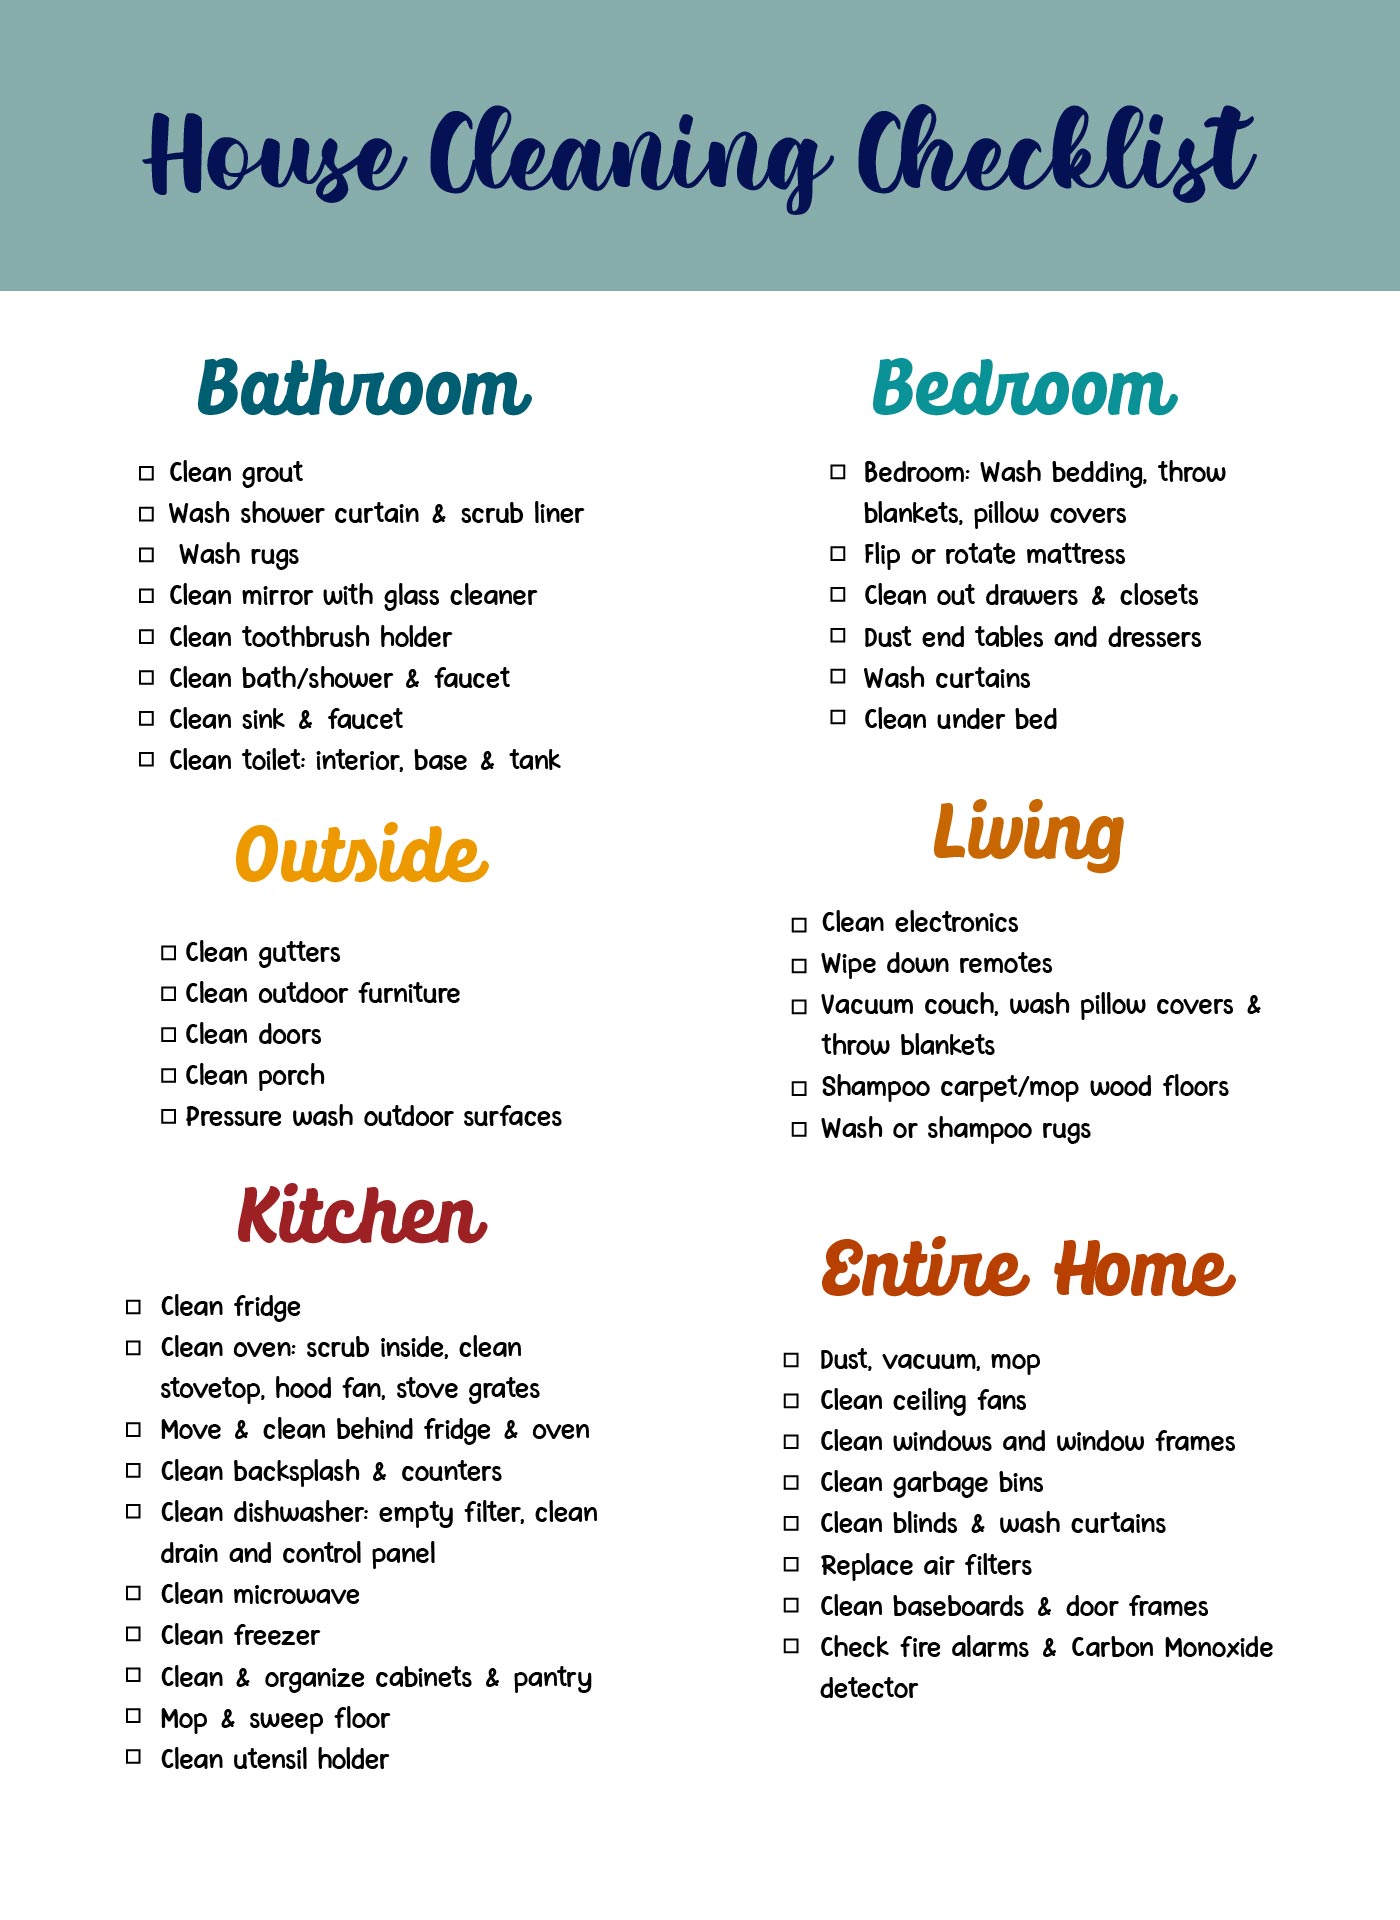 Weekly House Cleaning Schedule Checklist